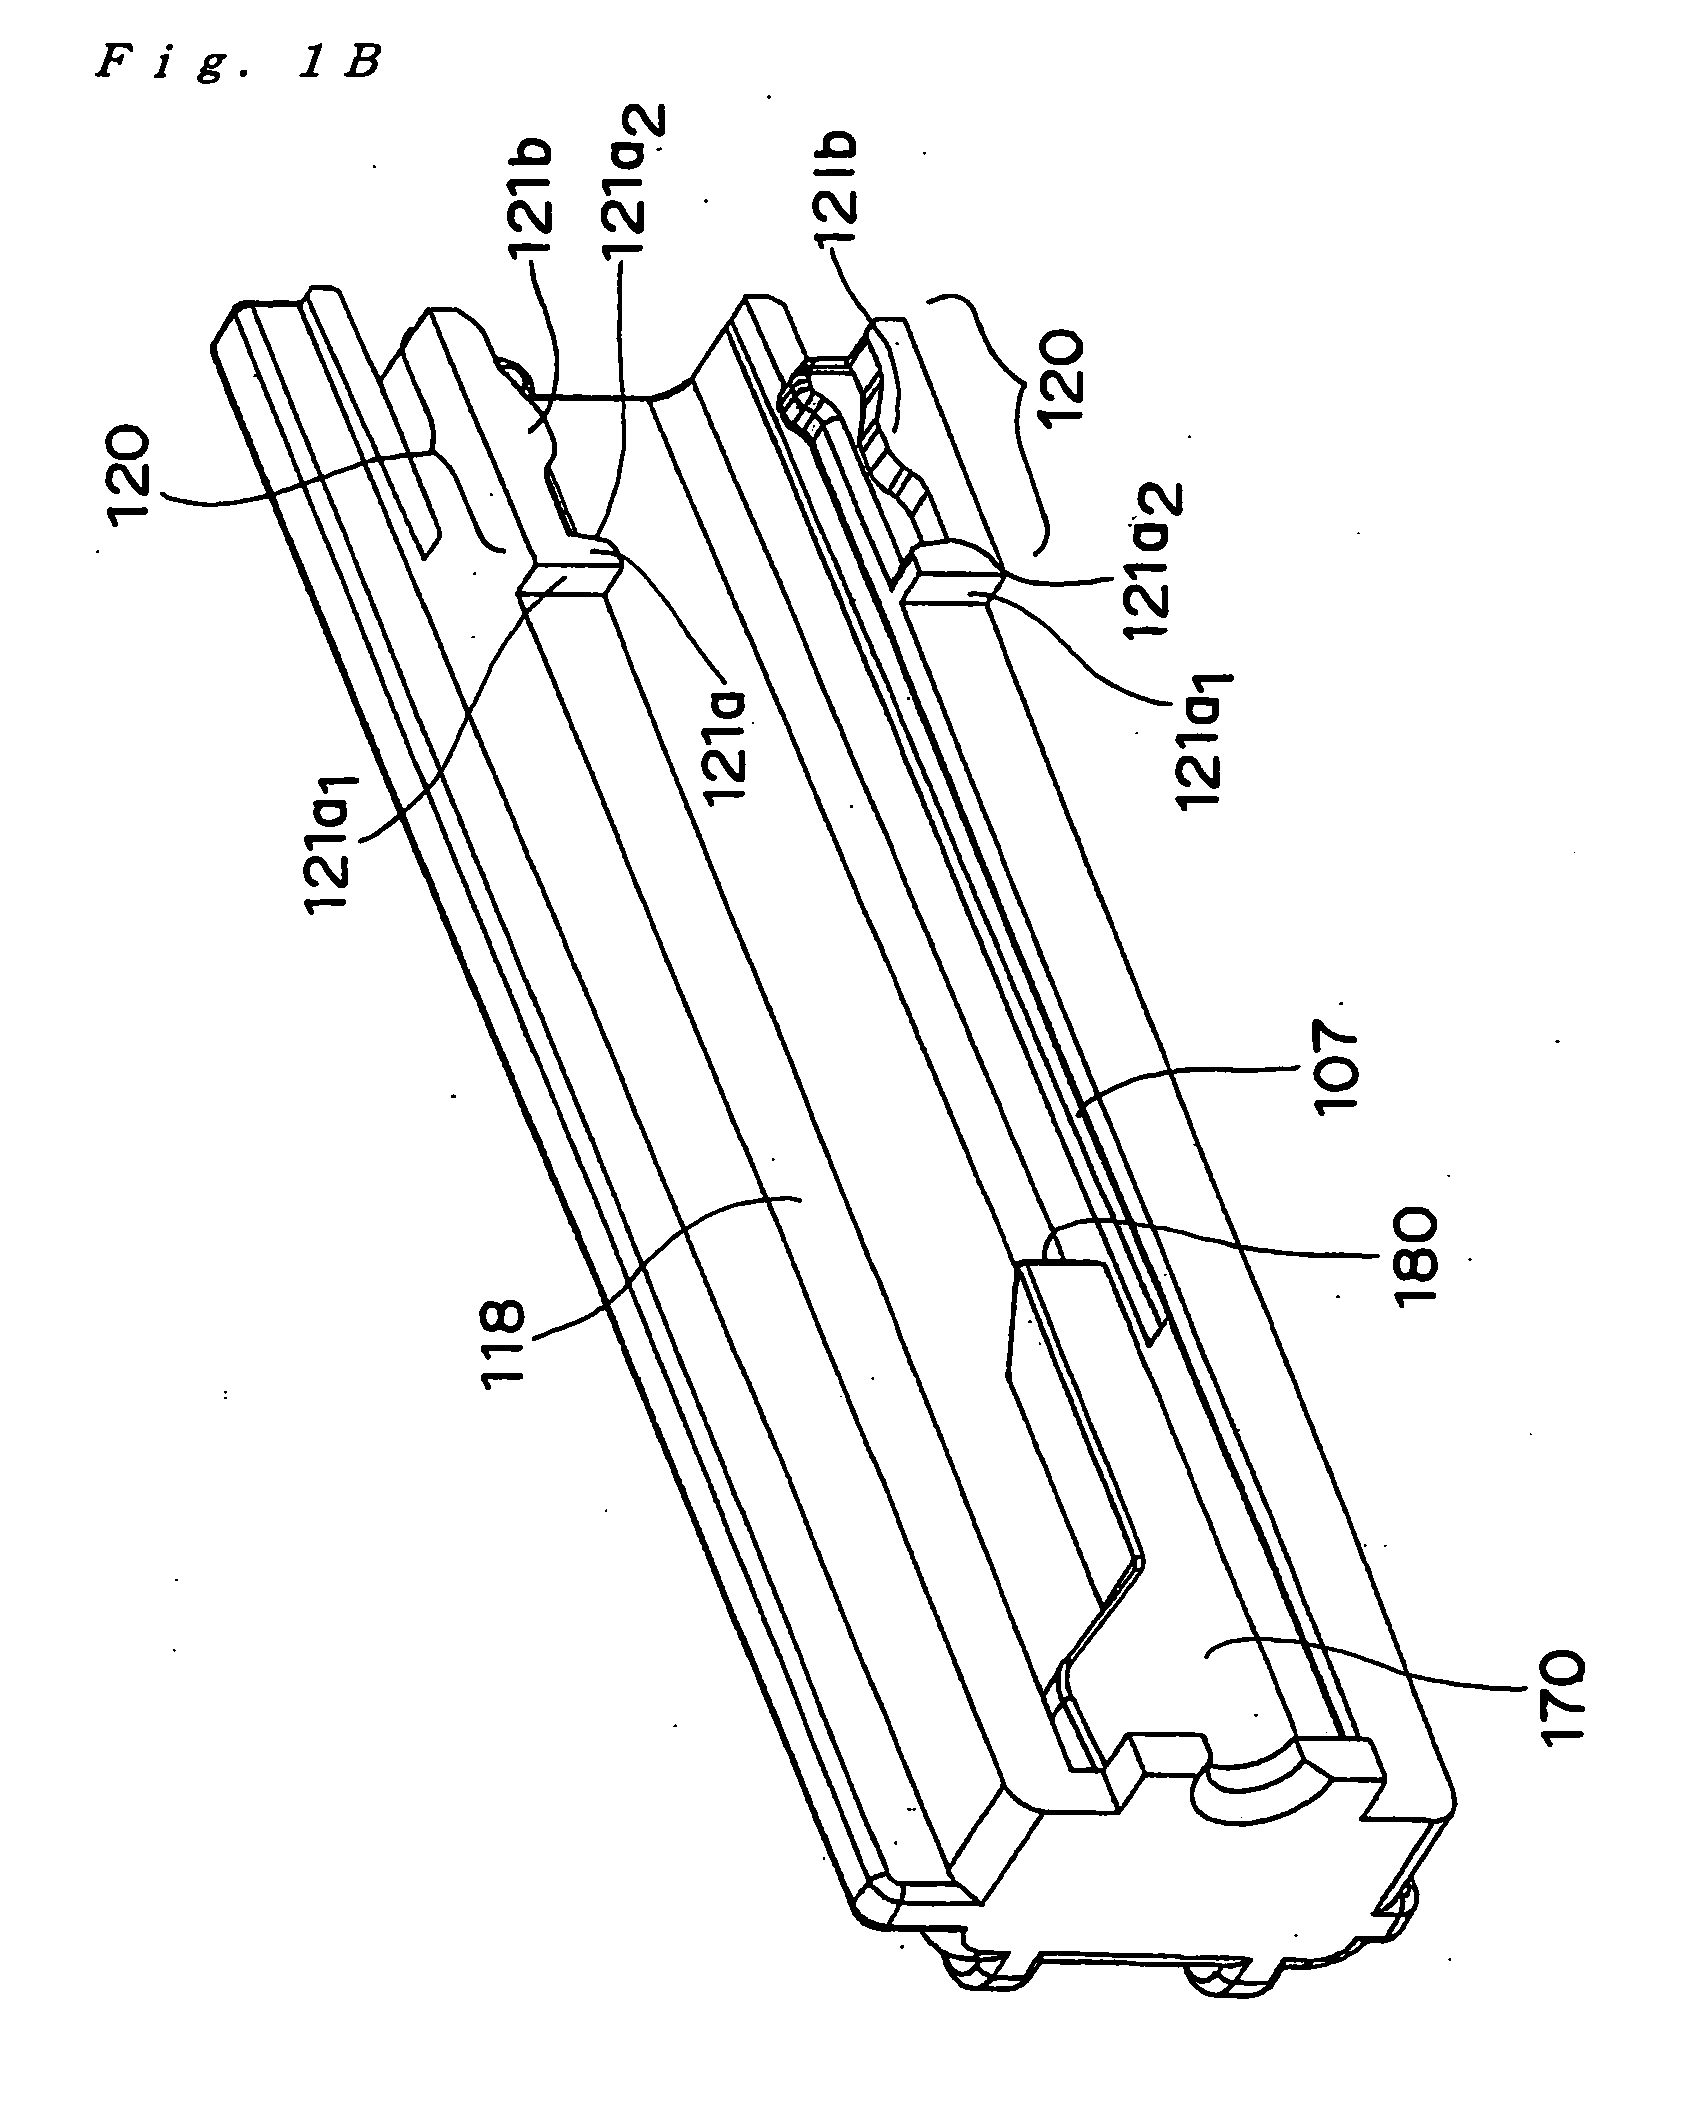 Lancet Assembly and Pricking Device